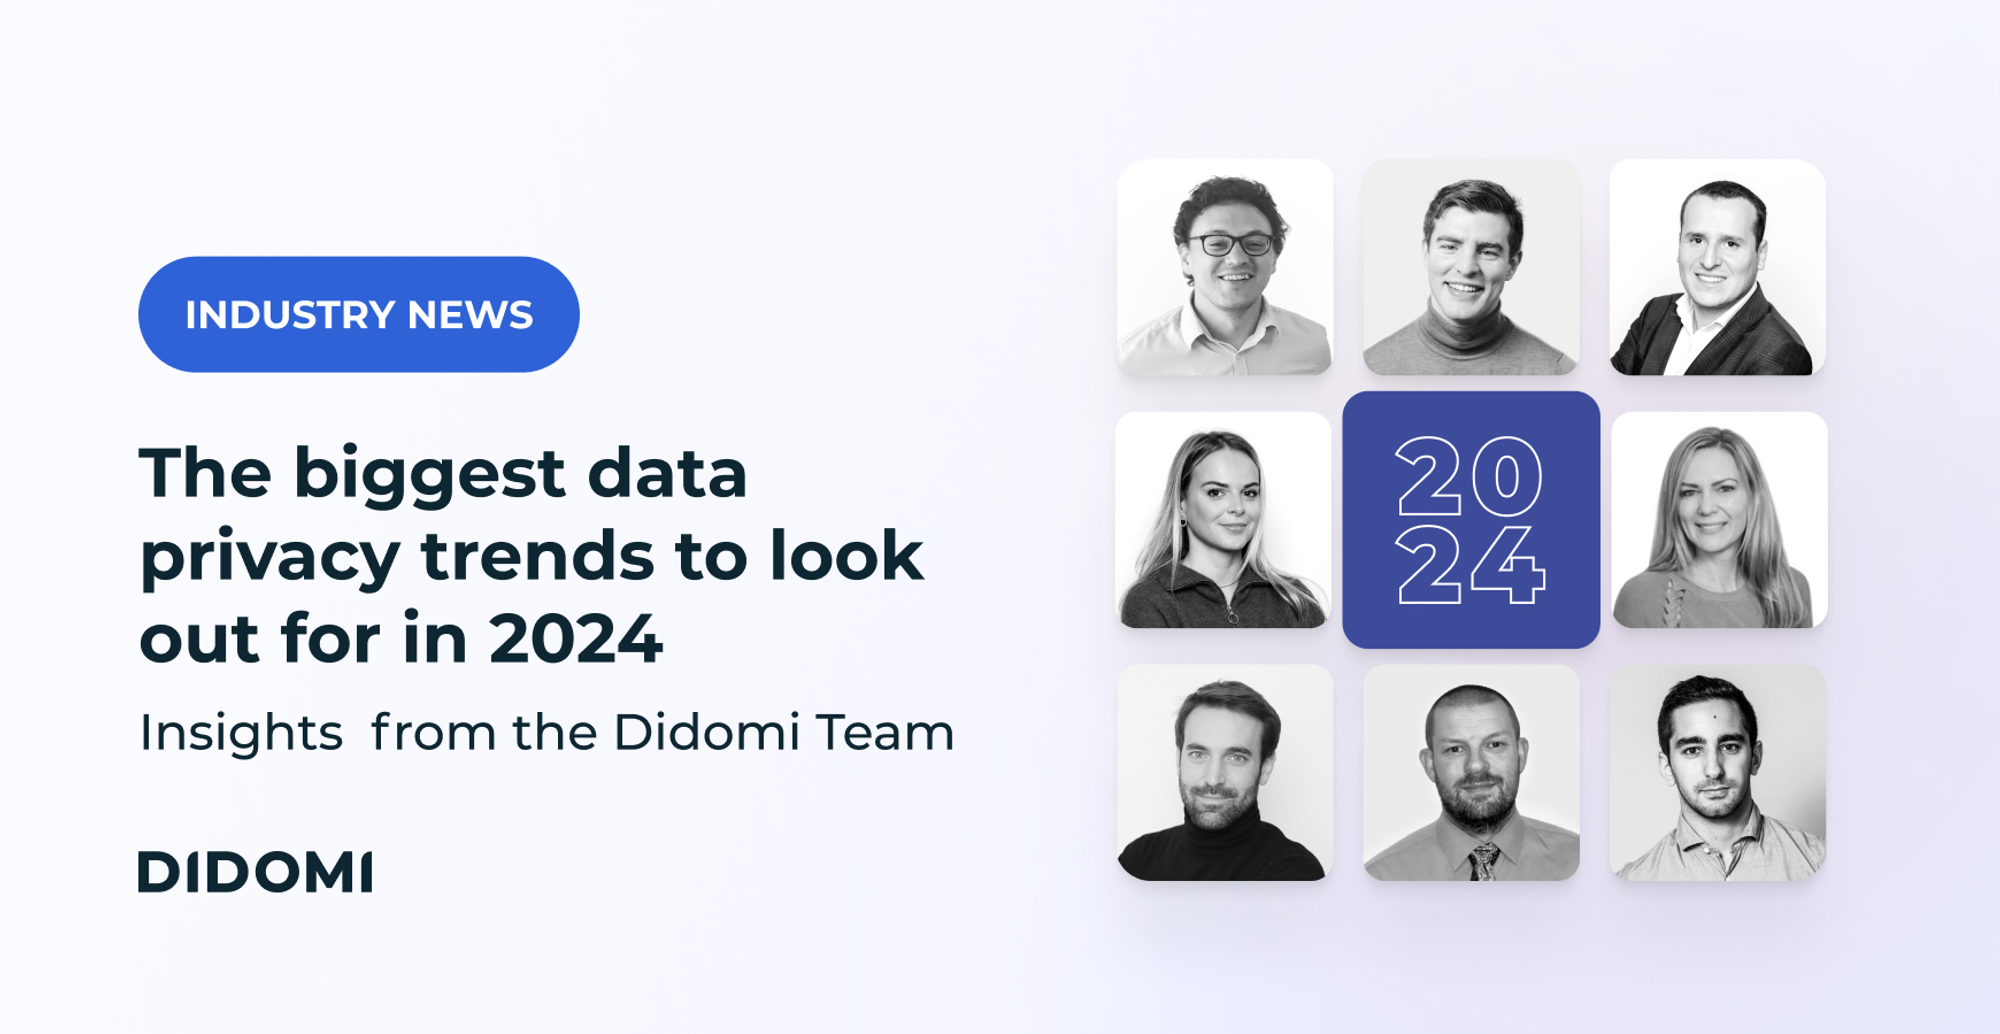 On the right side of the image, 8 photographies of the Didomi team are forming a square frame around the numbers "2024". On the left, a label "Didomi news" stands above the title "Top data privacy trends for 2024: Insights from the Didomi team"